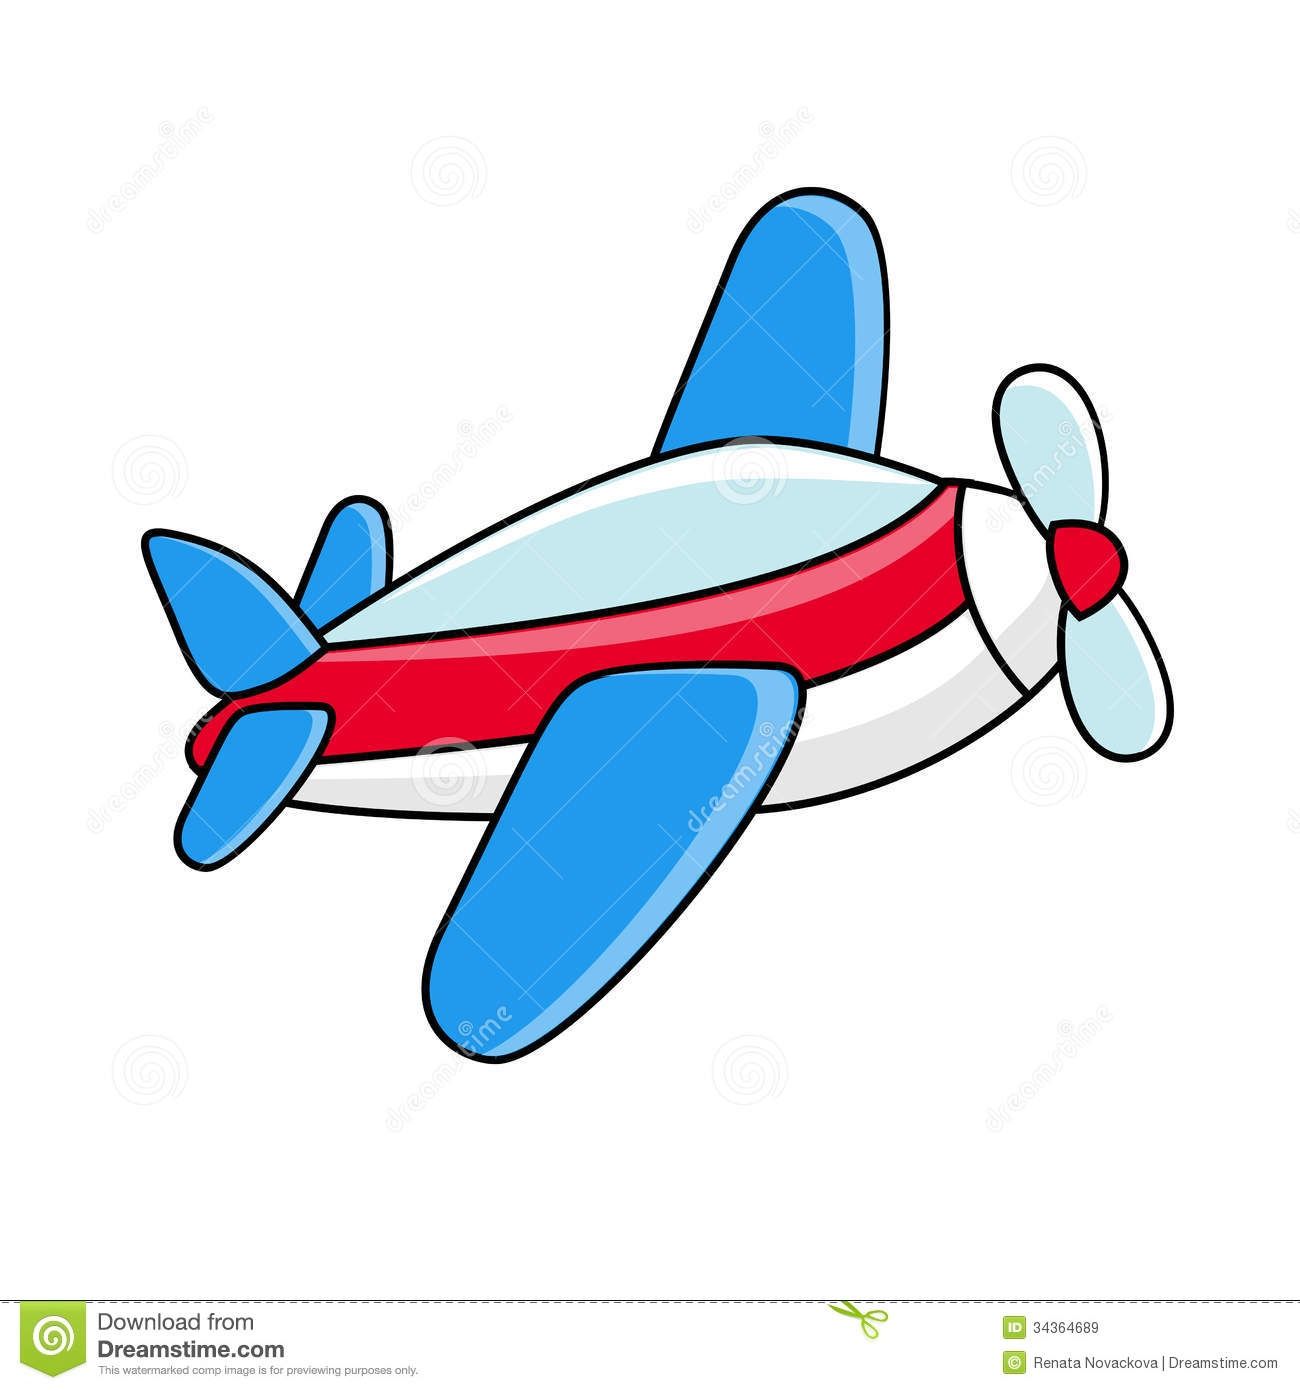 Toy airplane clipart.